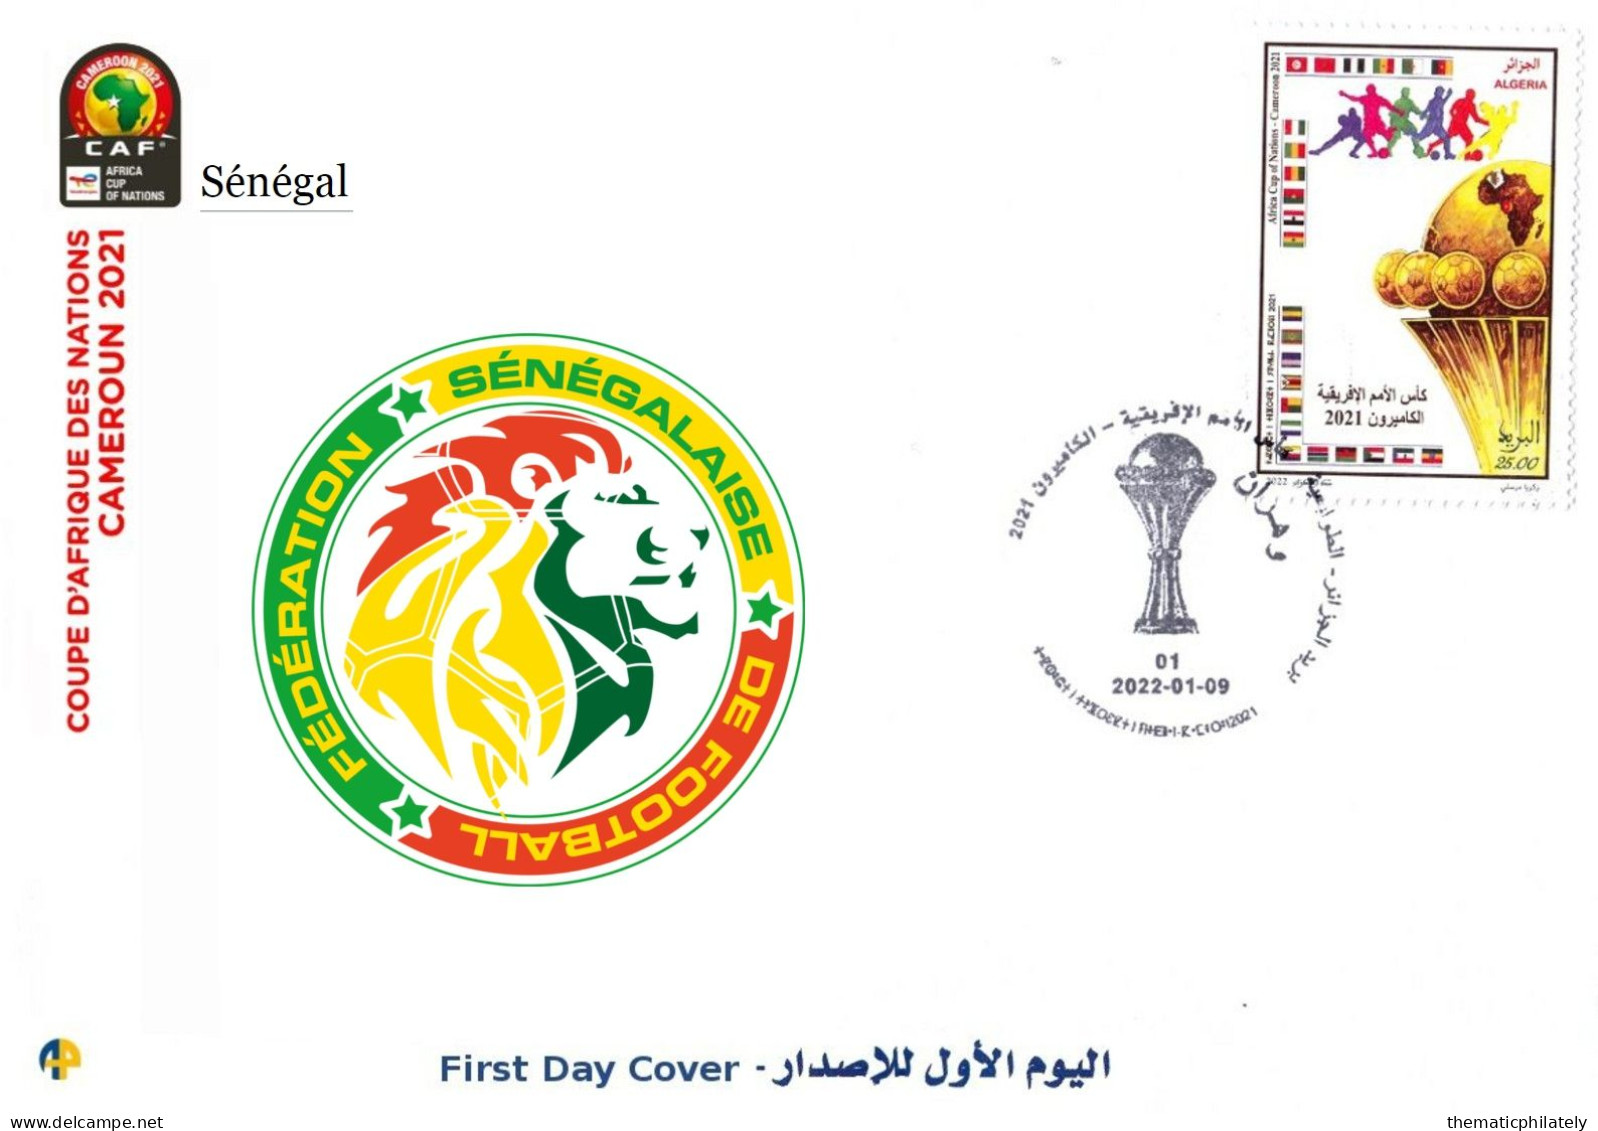 Algeria FDC 1888 Coupe D'Afrique Des Nations Football 2021 Africa Cup Of Nations Soccer CAF Sénégal Senegal - Afrika Cup